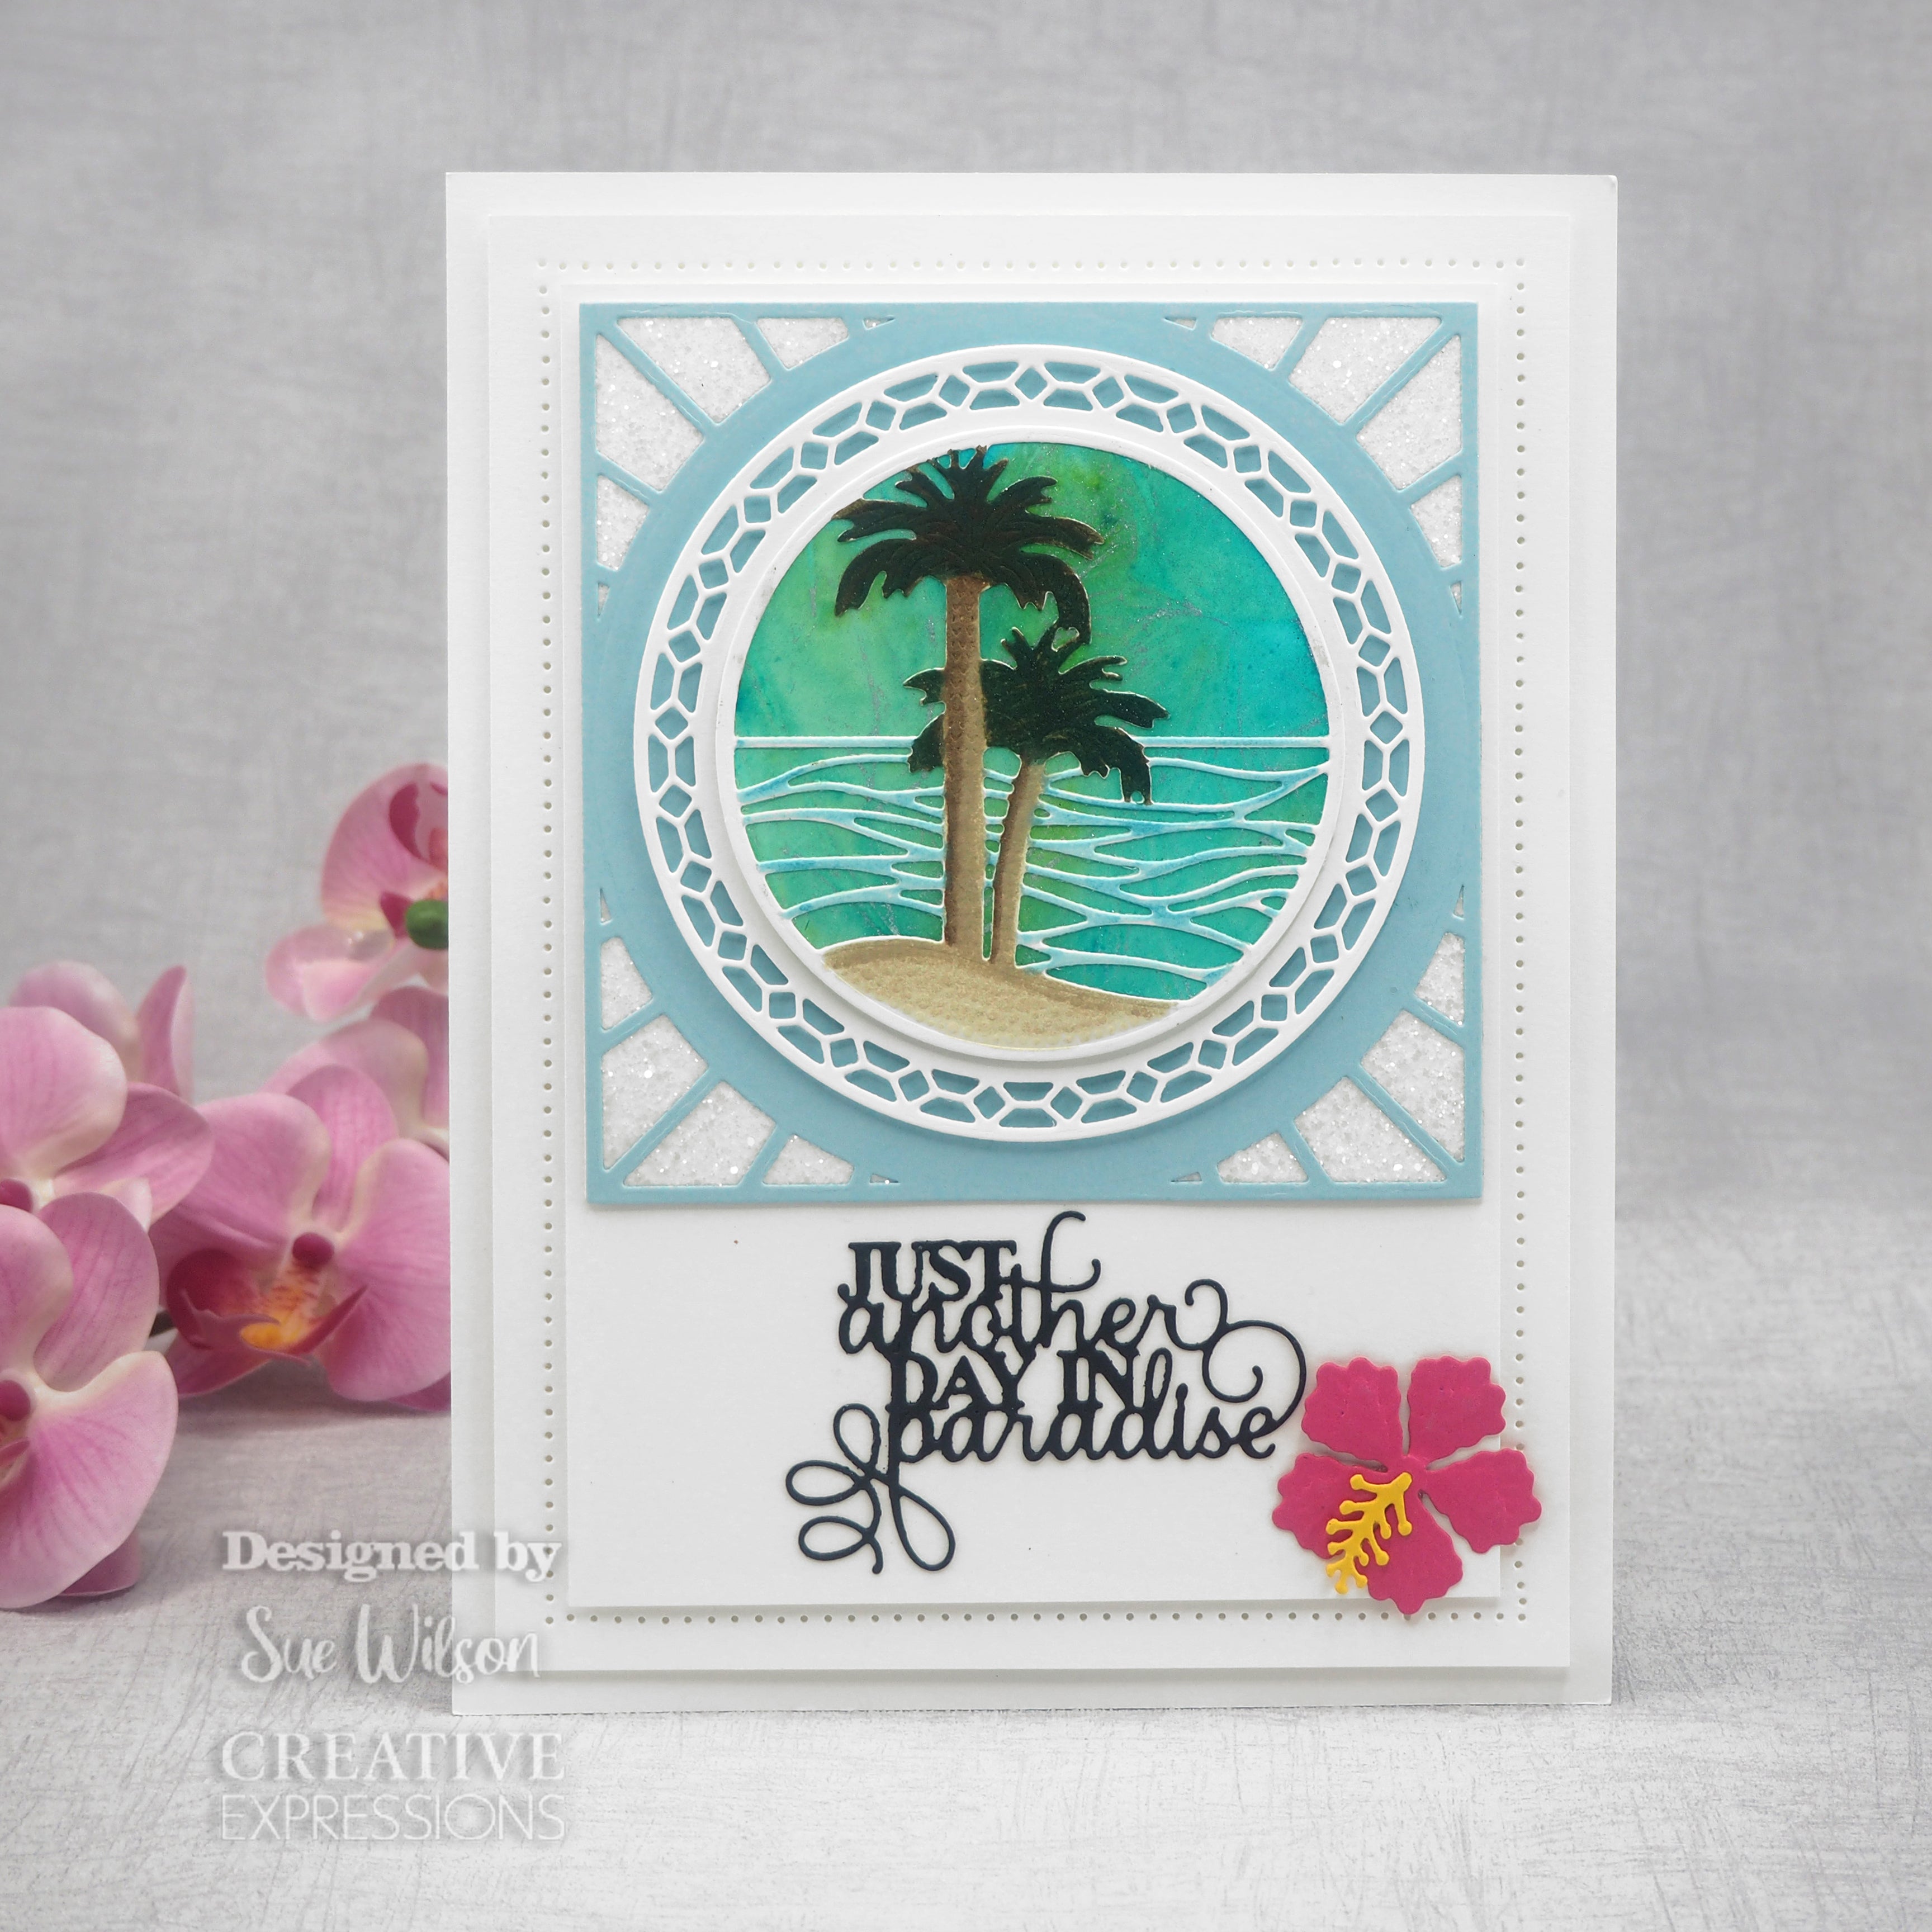 Creative Expressions Sue Wilson Mini Sentiments Just Another Day In Paradise Craft Die